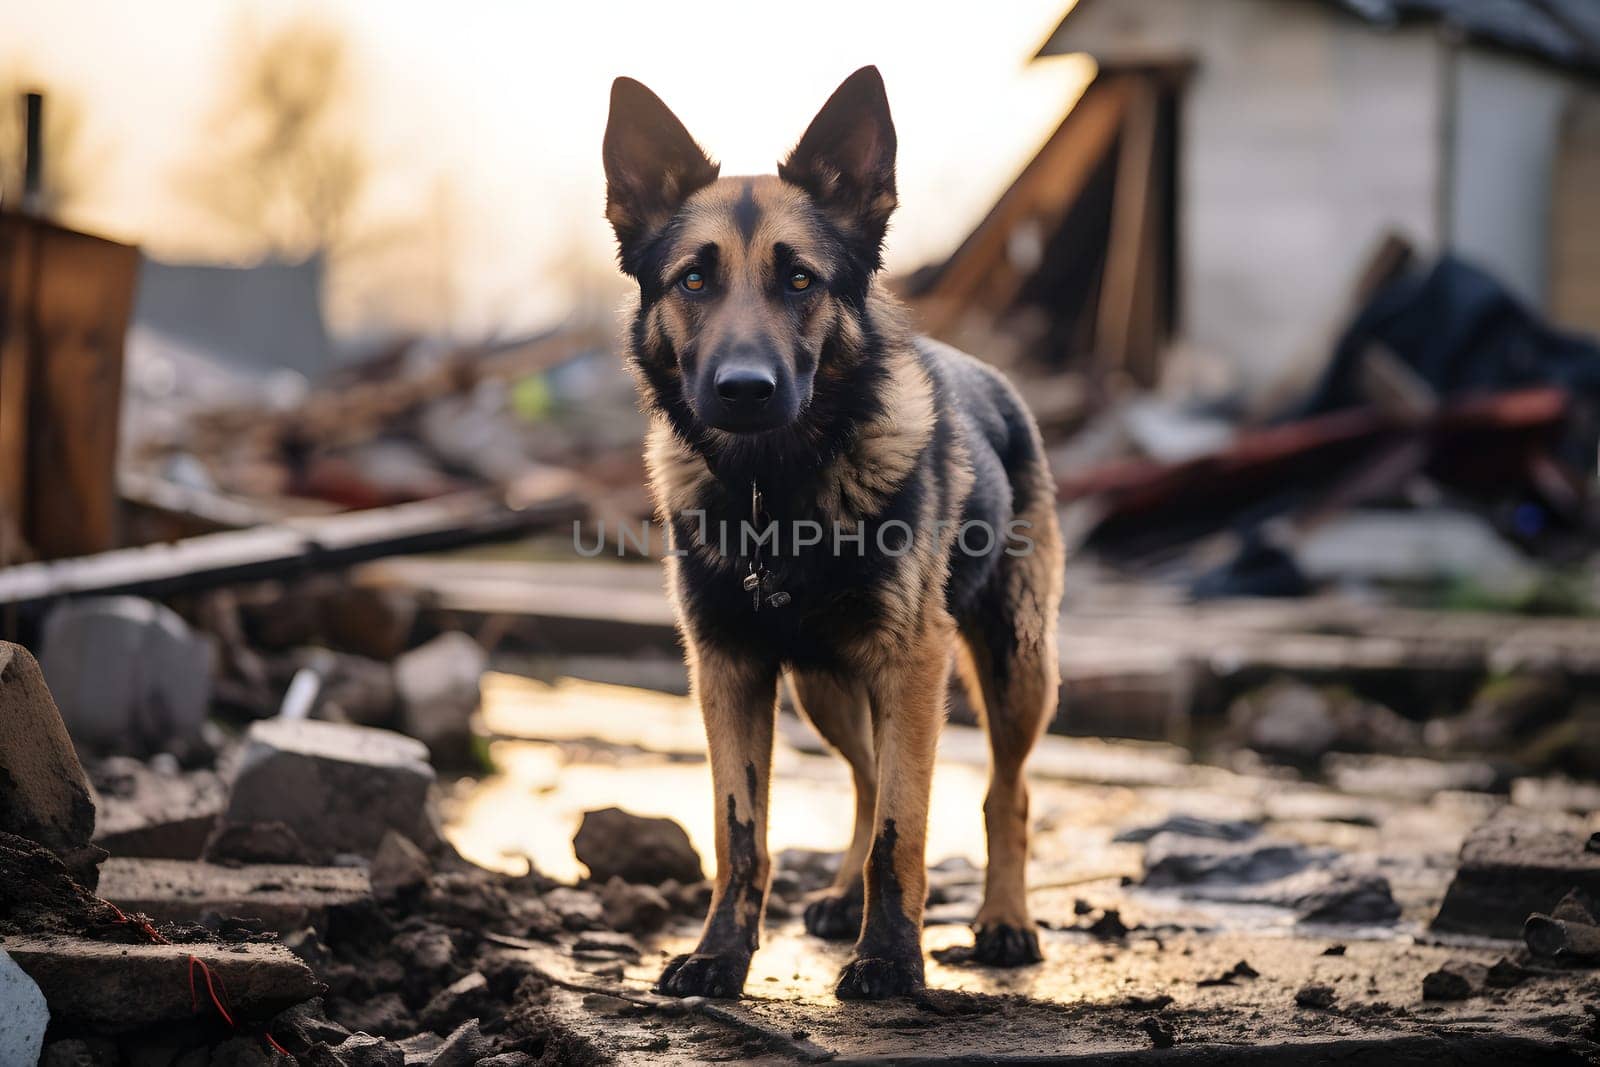 Alone wet and dirty German Shepherd Dog after disaster on the background of house rubble. Neural network generated image. Not based on any actual scene.